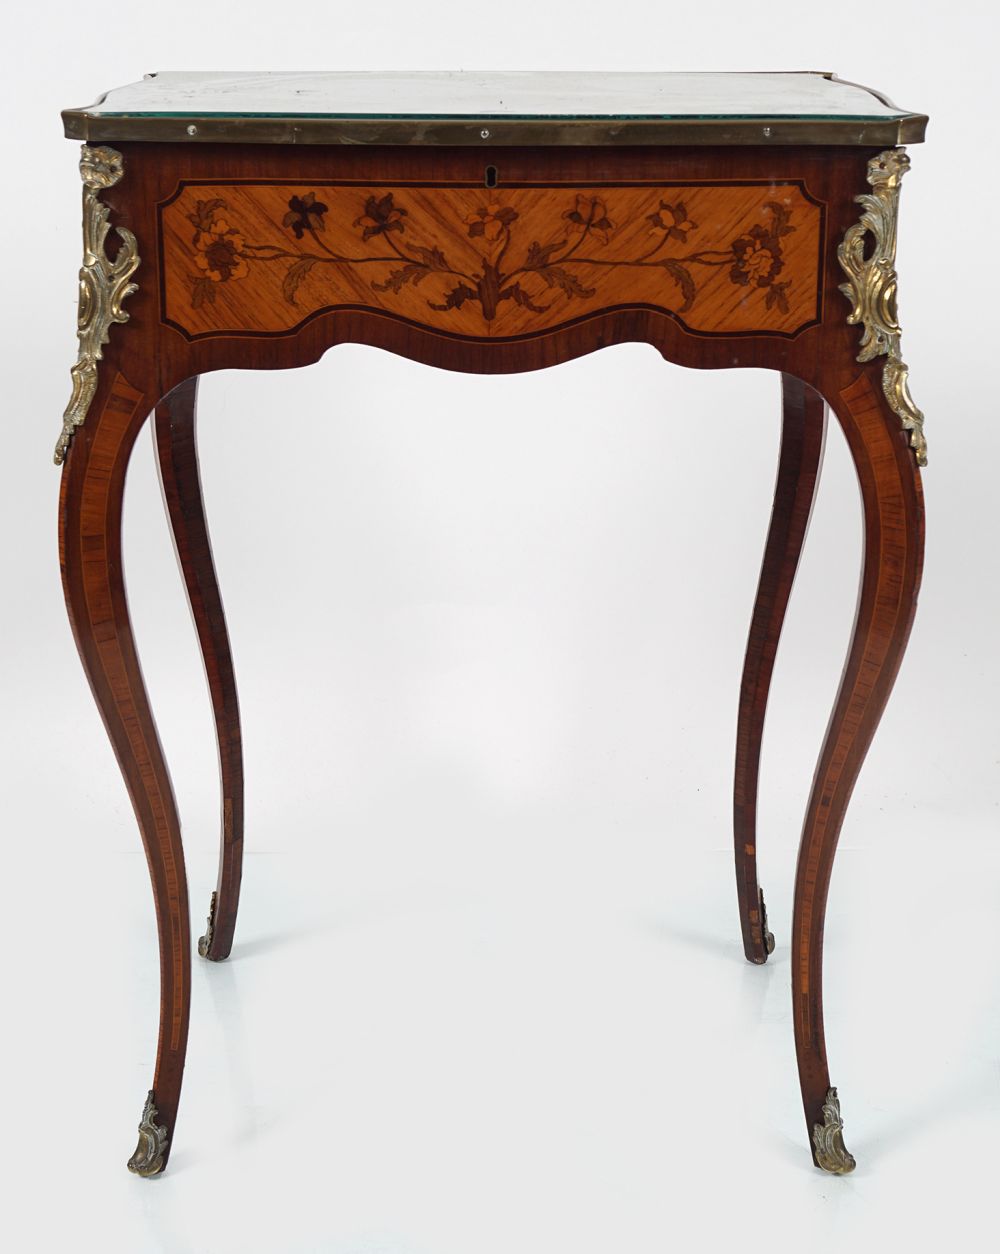 19TH-CENTURY KINGWOOD AND MARQUETRY TABLE